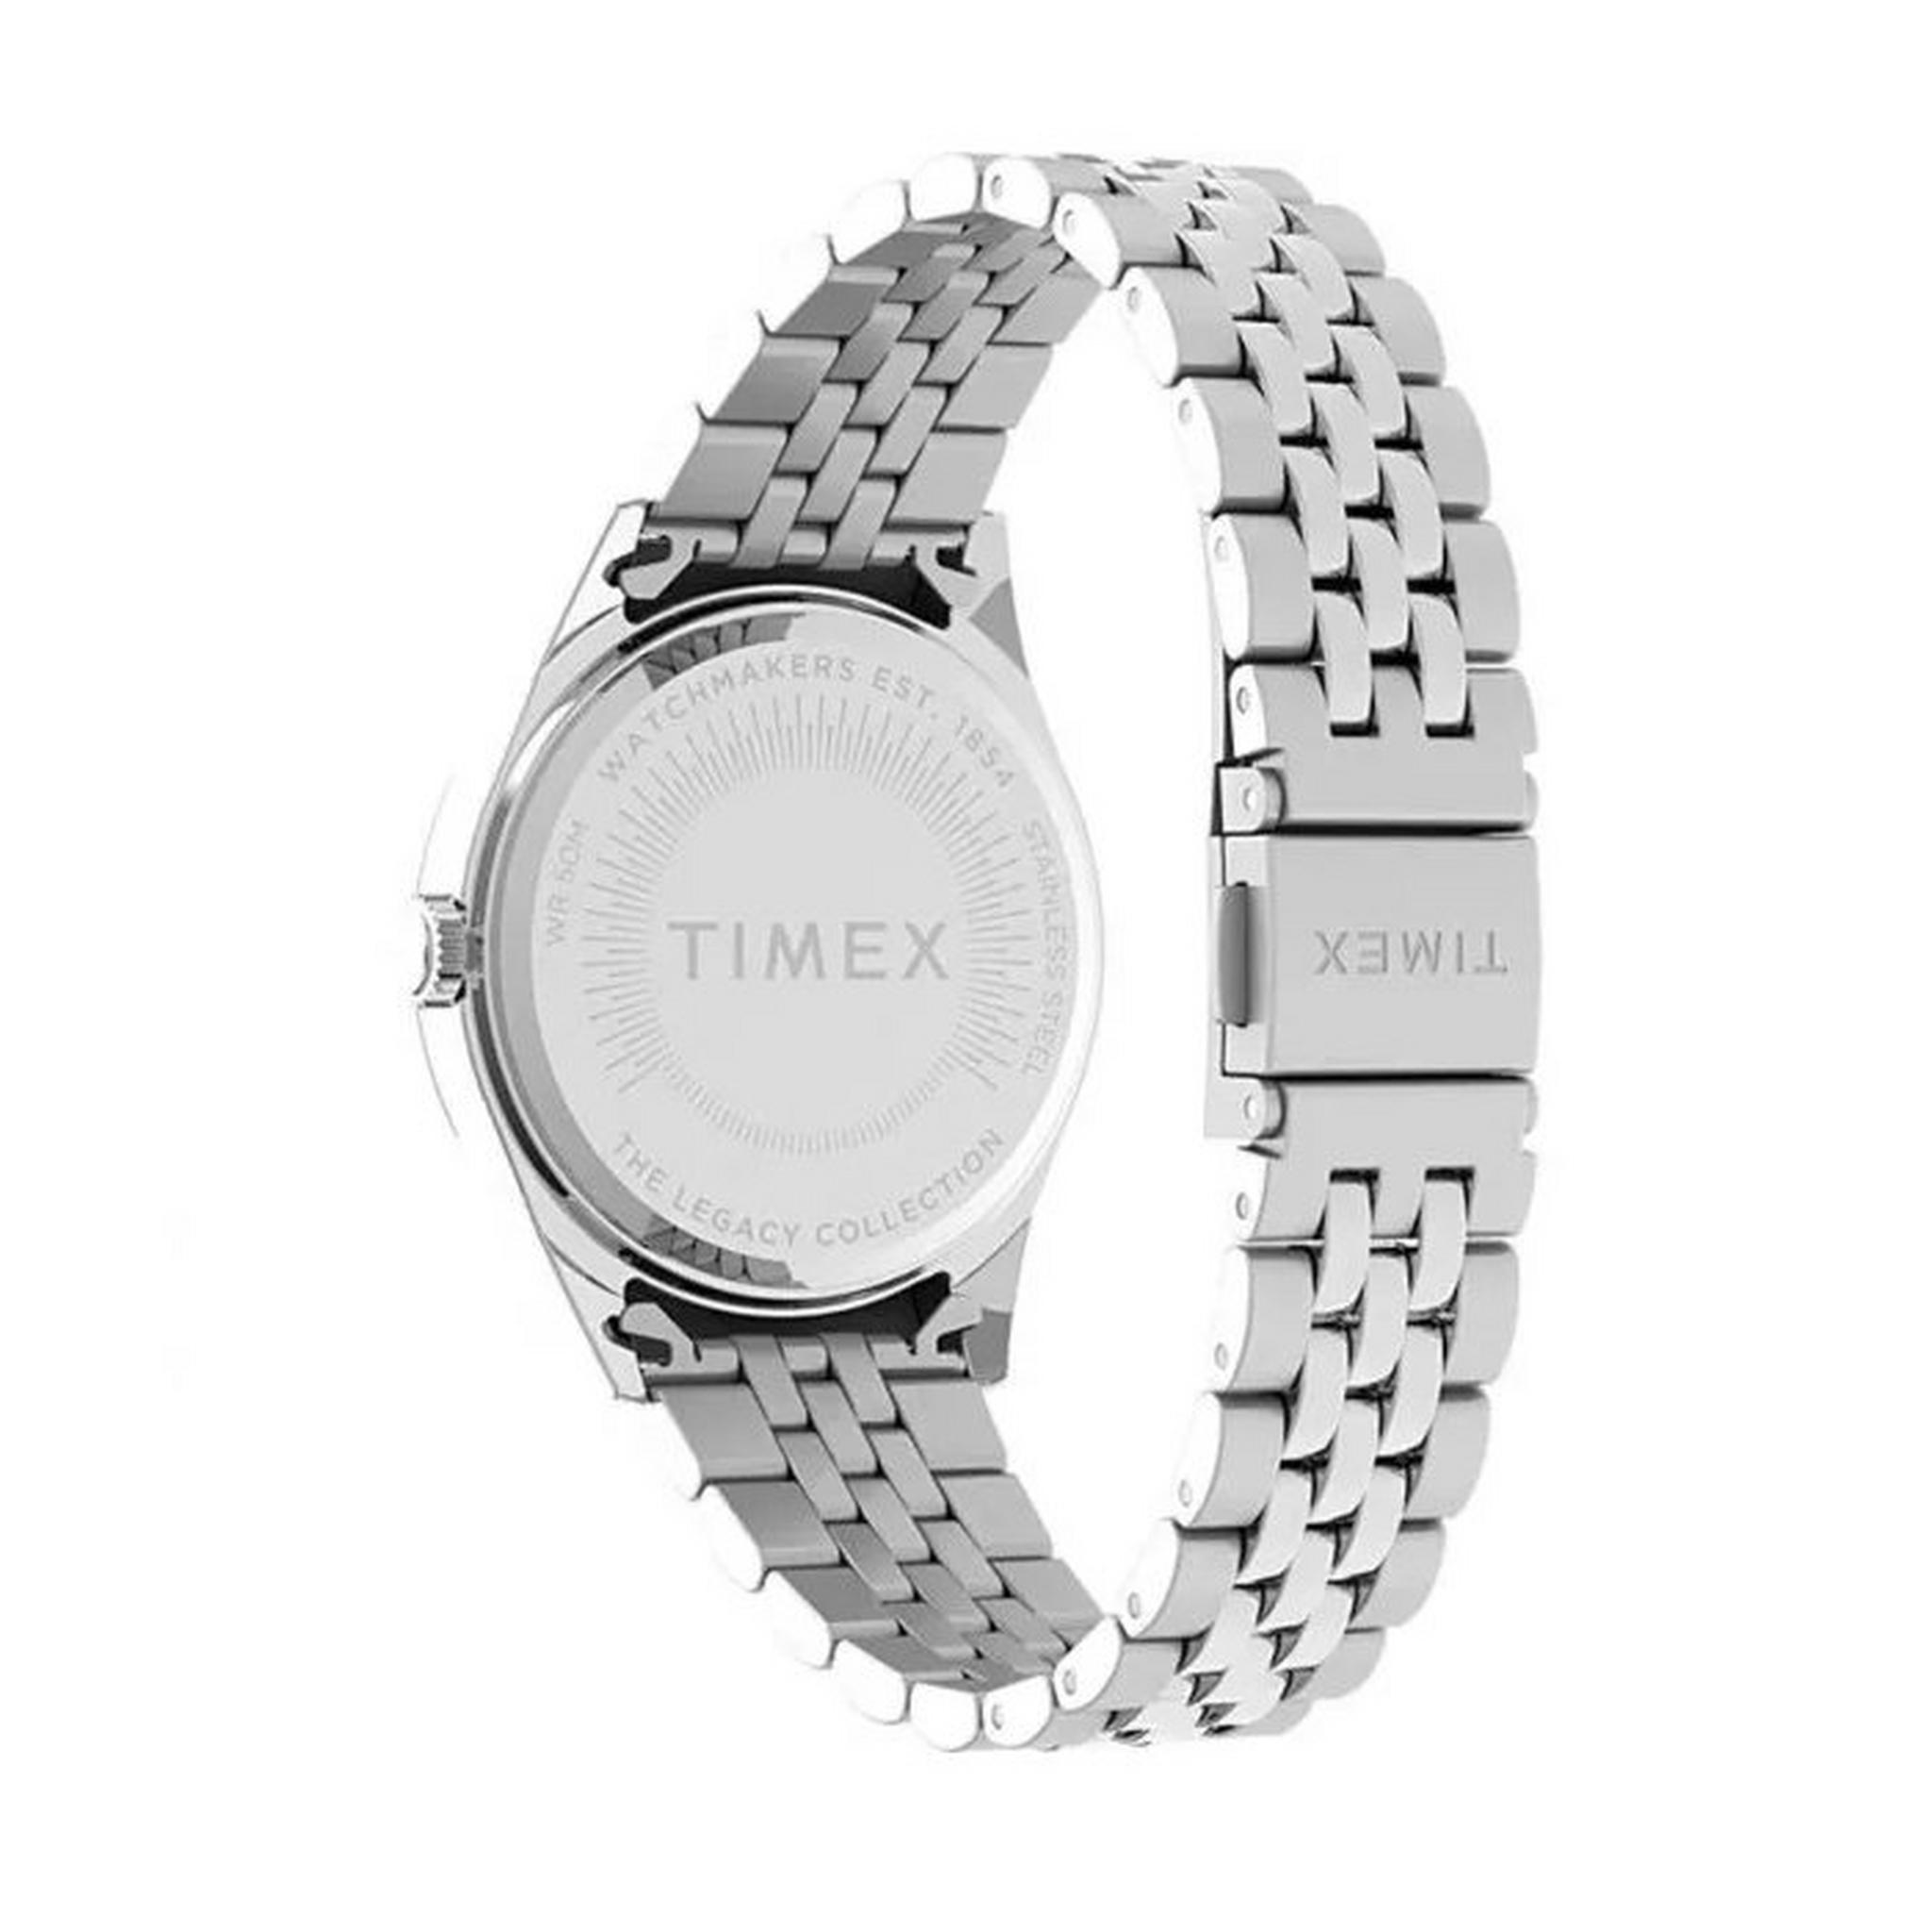 TIMEX Legacy Women's Watch, Analog, 36mm, Stainless Steel Strap, TW2V68400 – Silver